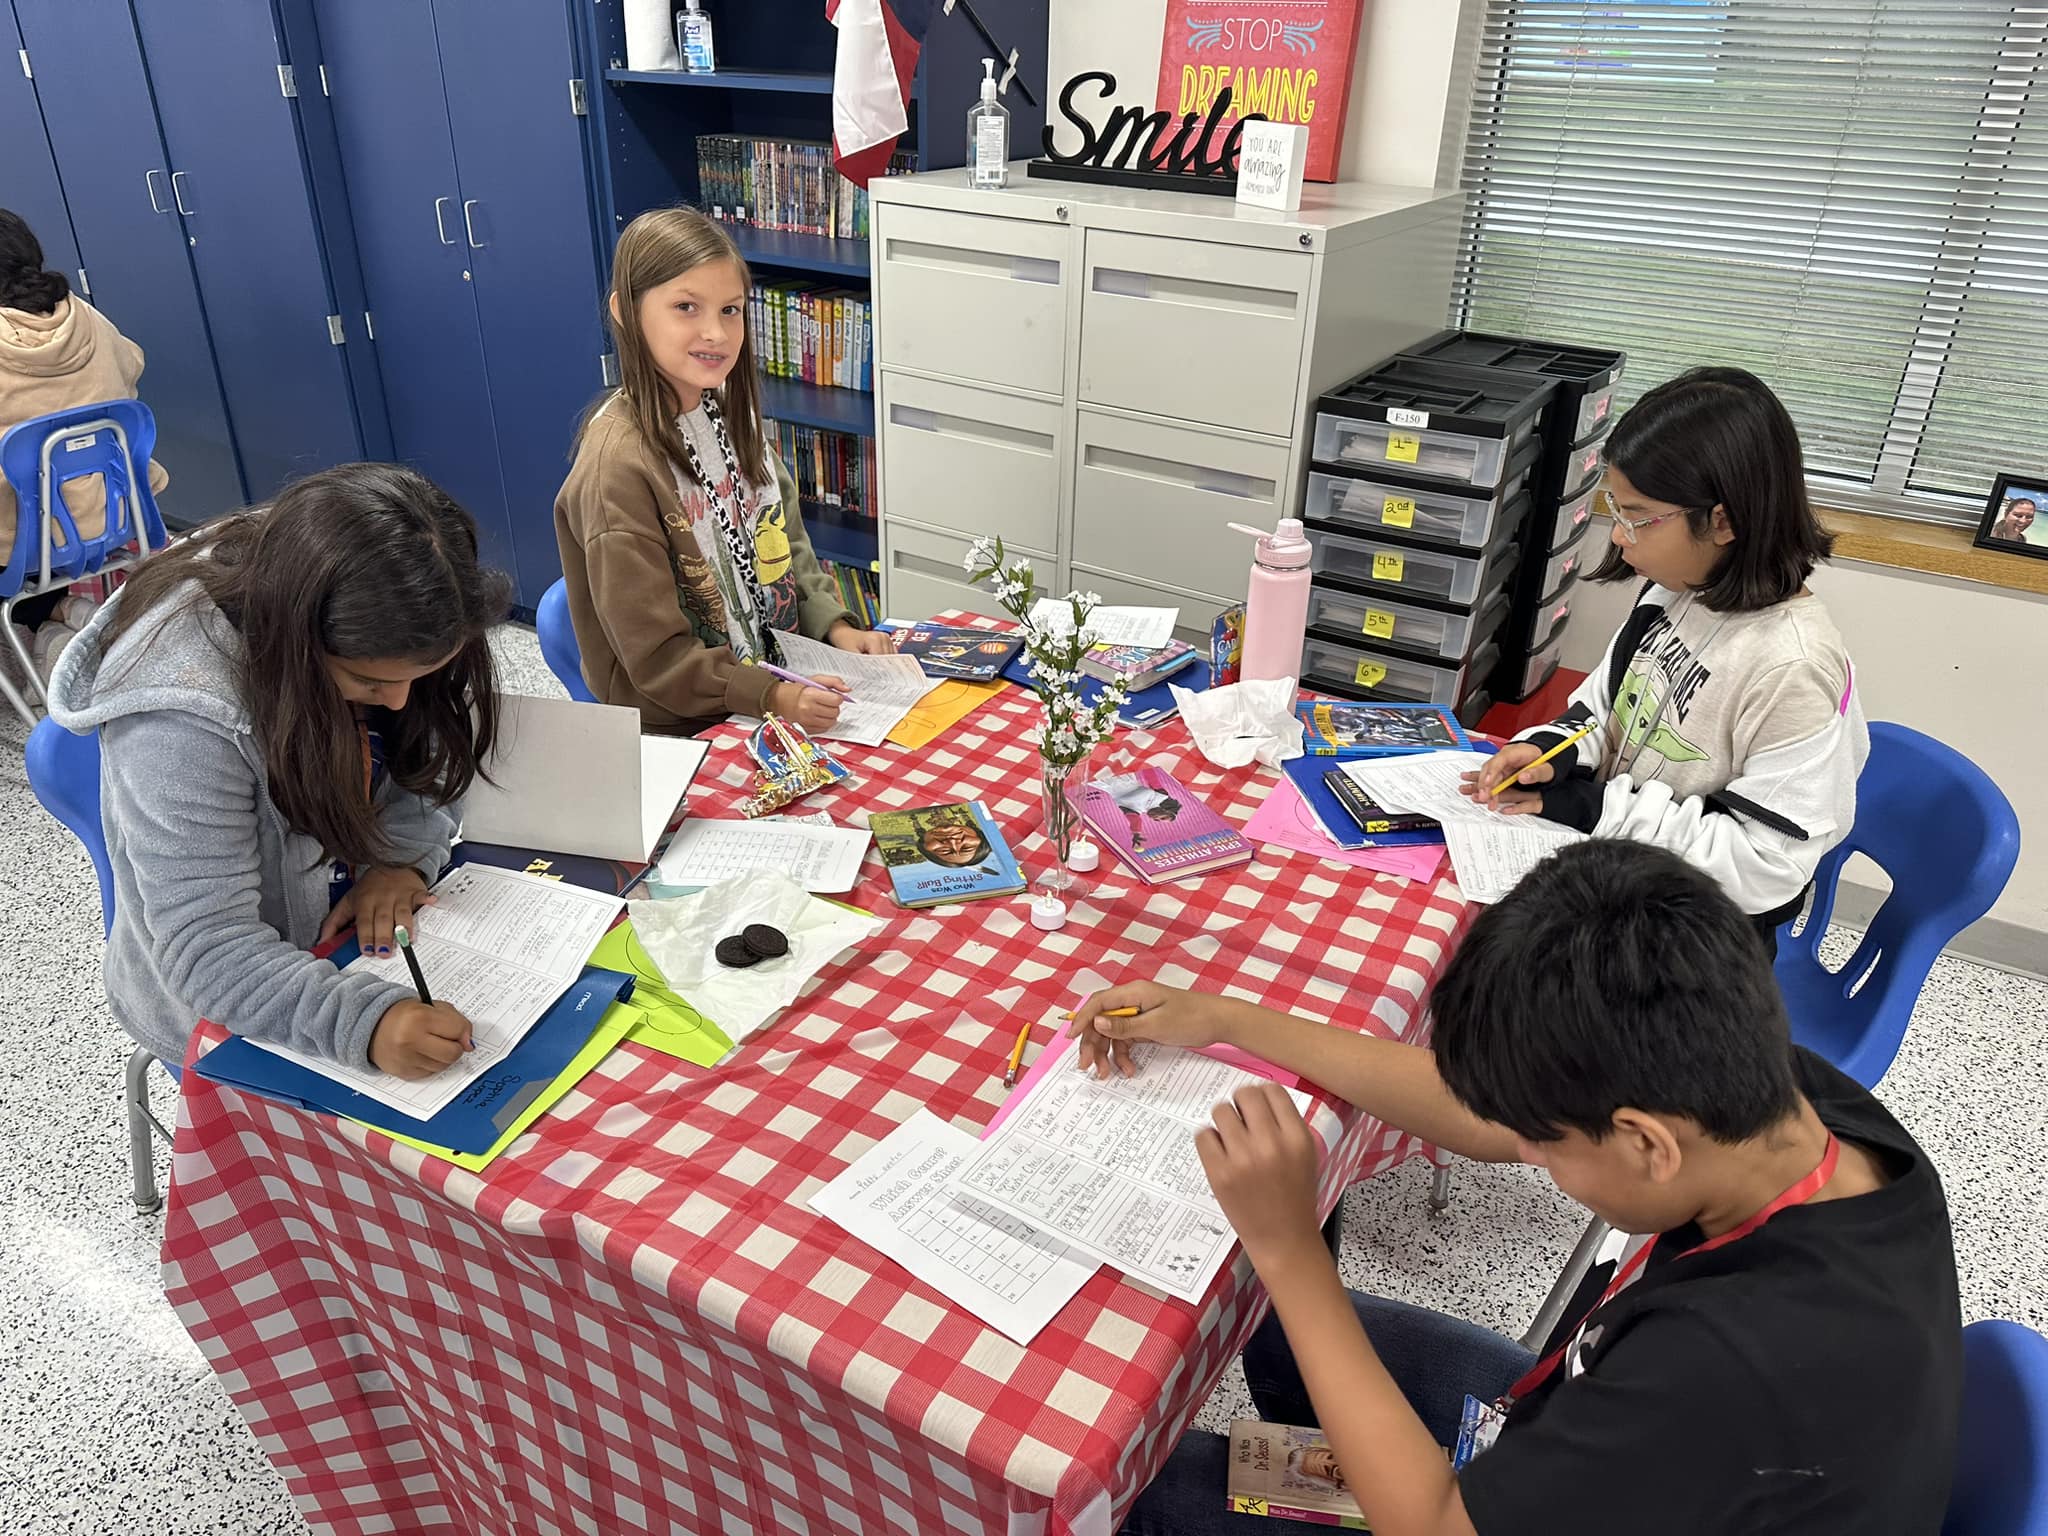 Needville students participating in book tasting